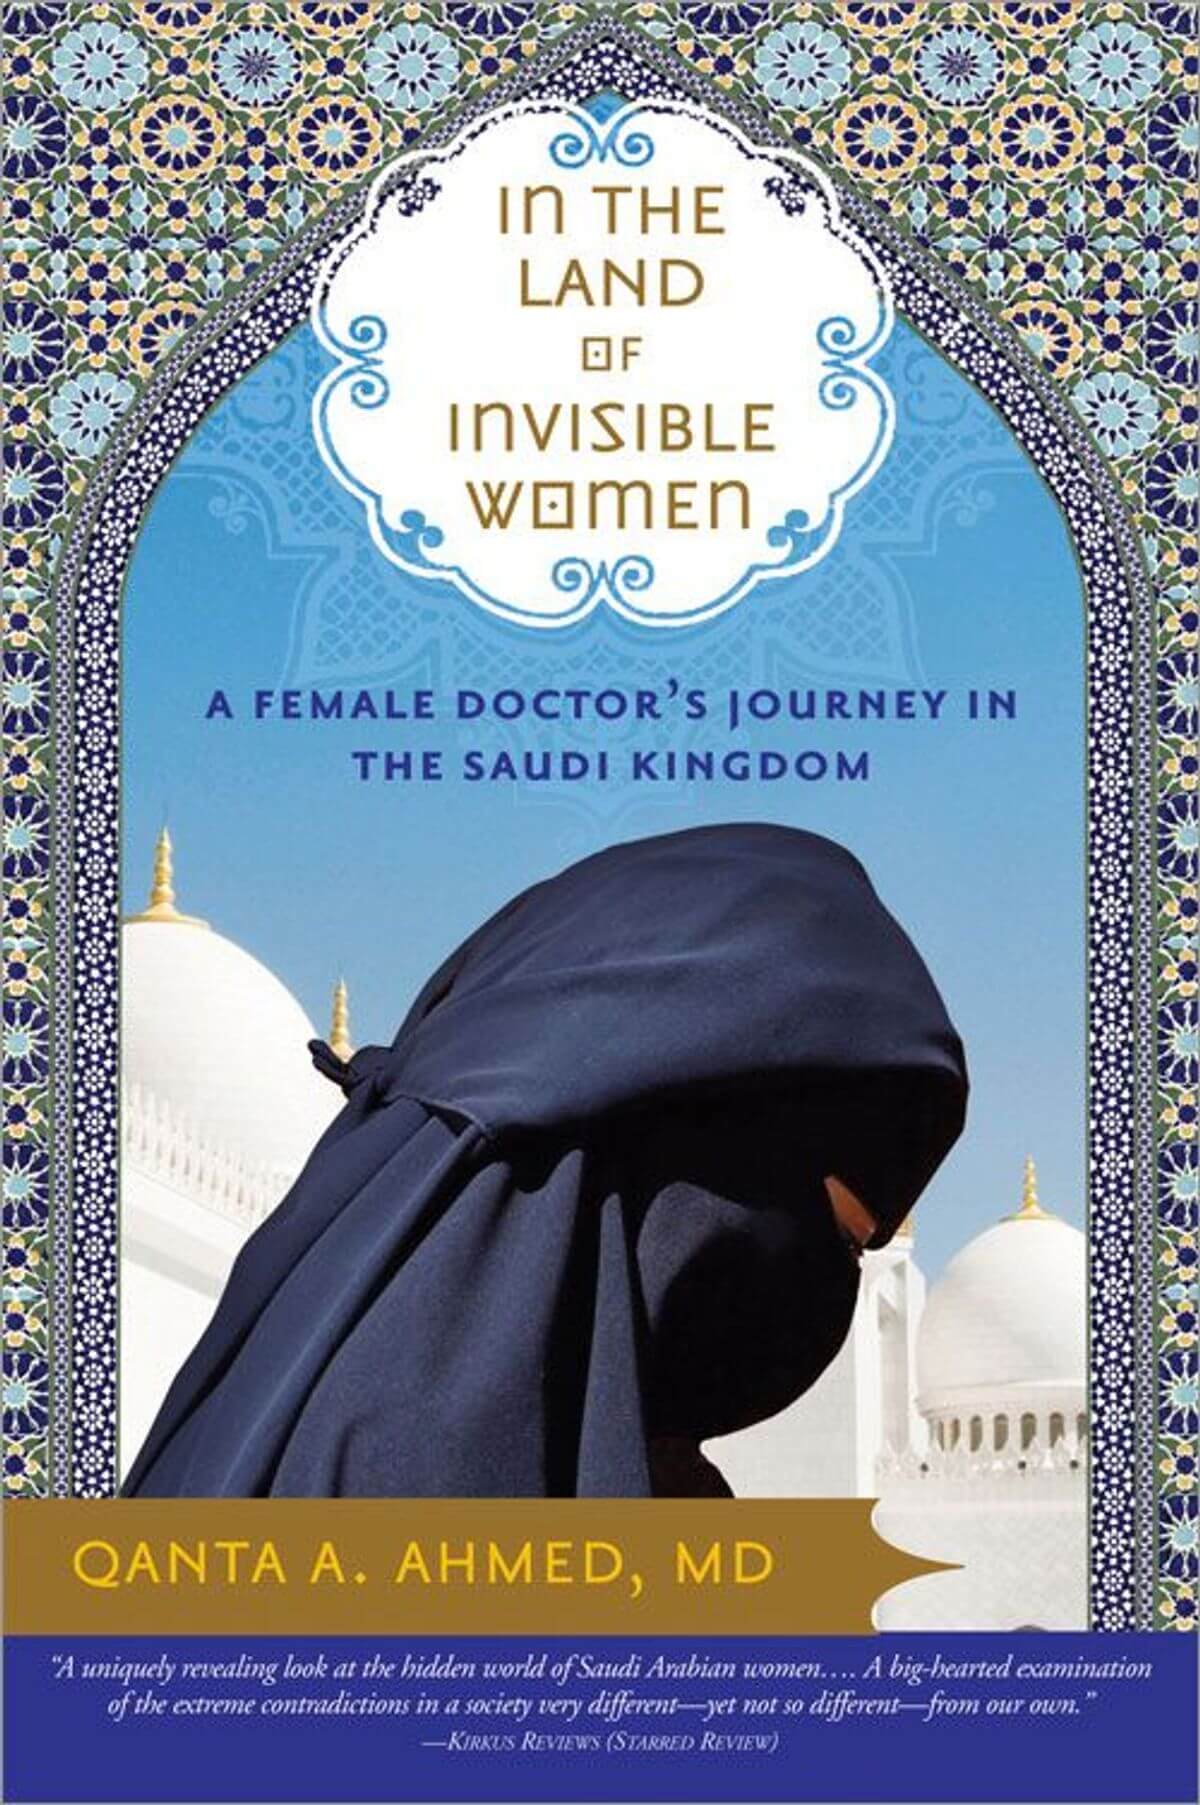 In the Land of Invisible Women by Dr. Qanta A. Ahmed